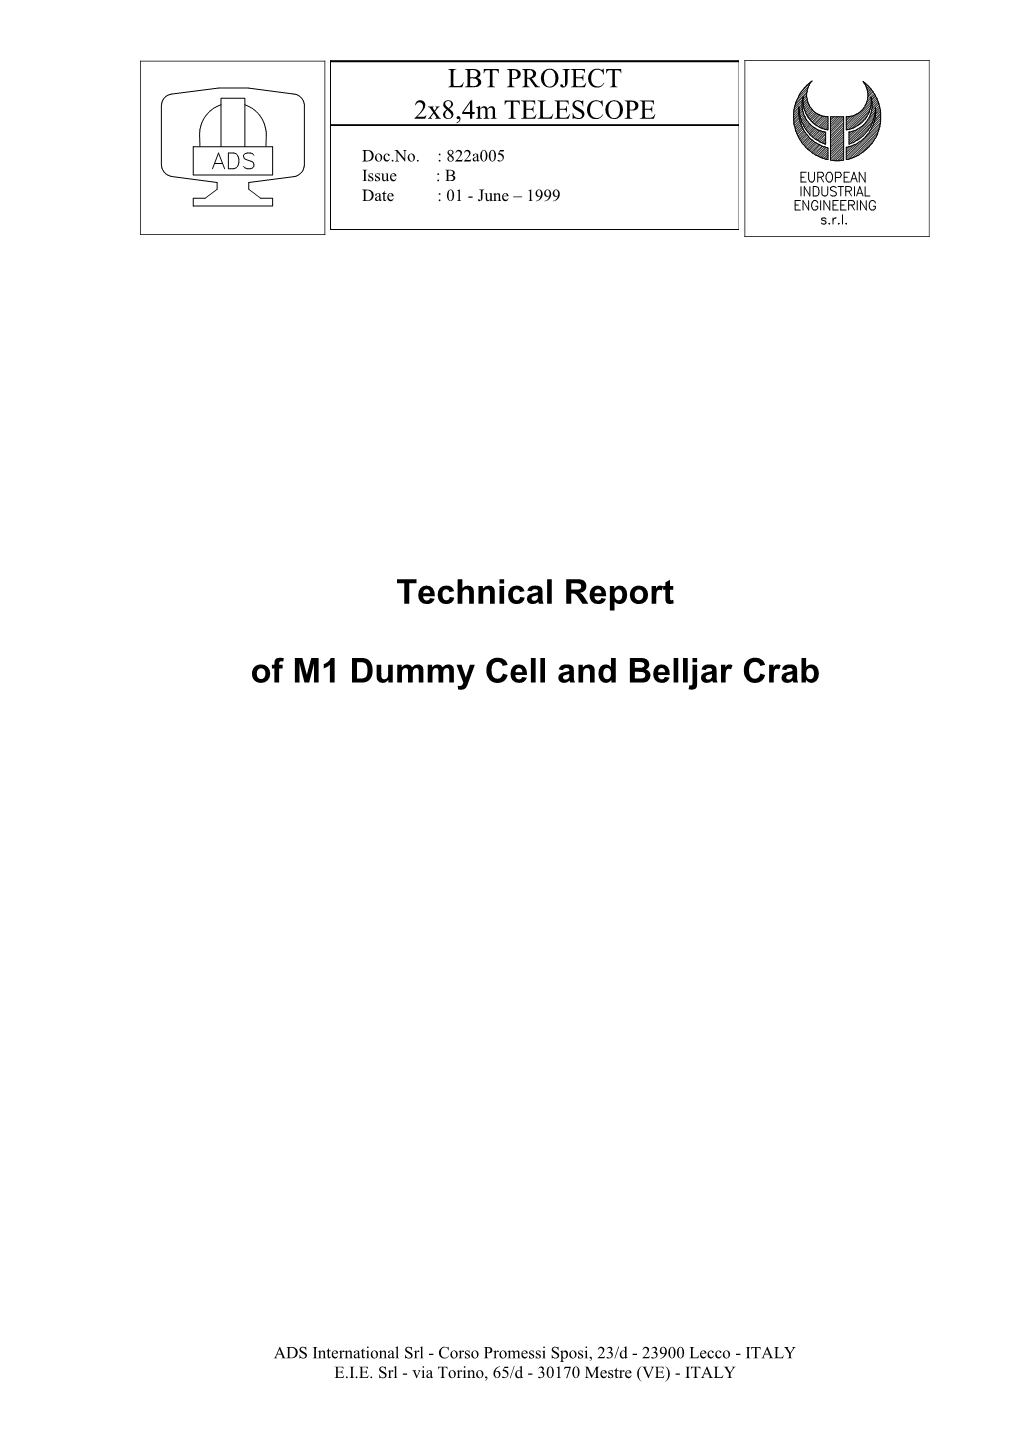 Of M1 Dummy Cell and Belljar Crab